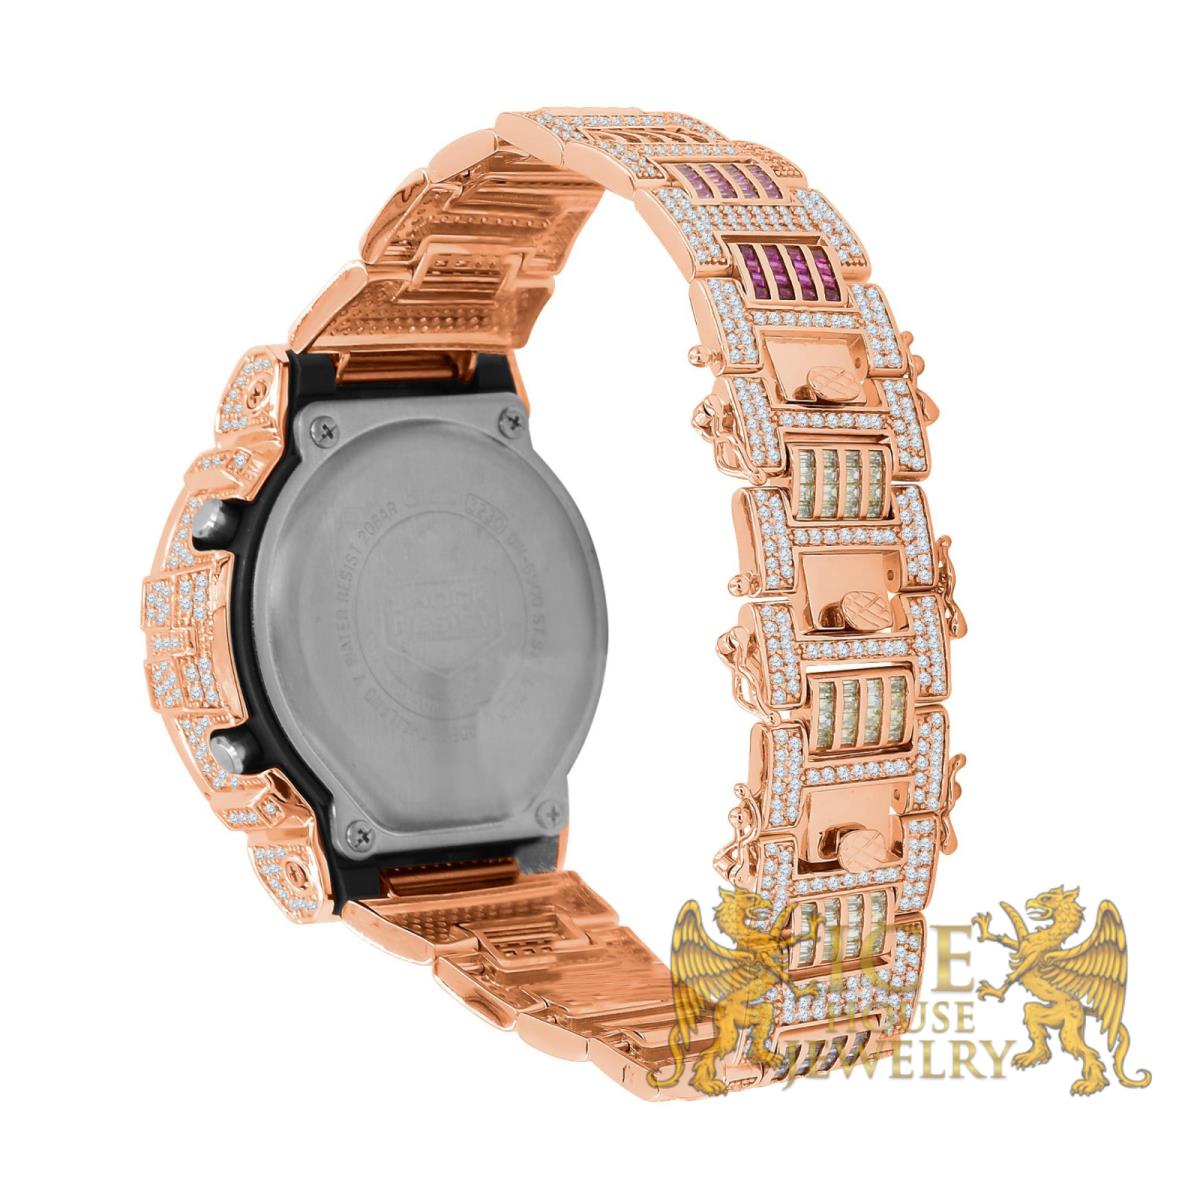 Icy Rainbow Baguettes On Rose Gold Finish Casio G-shock DW-6900 Watch